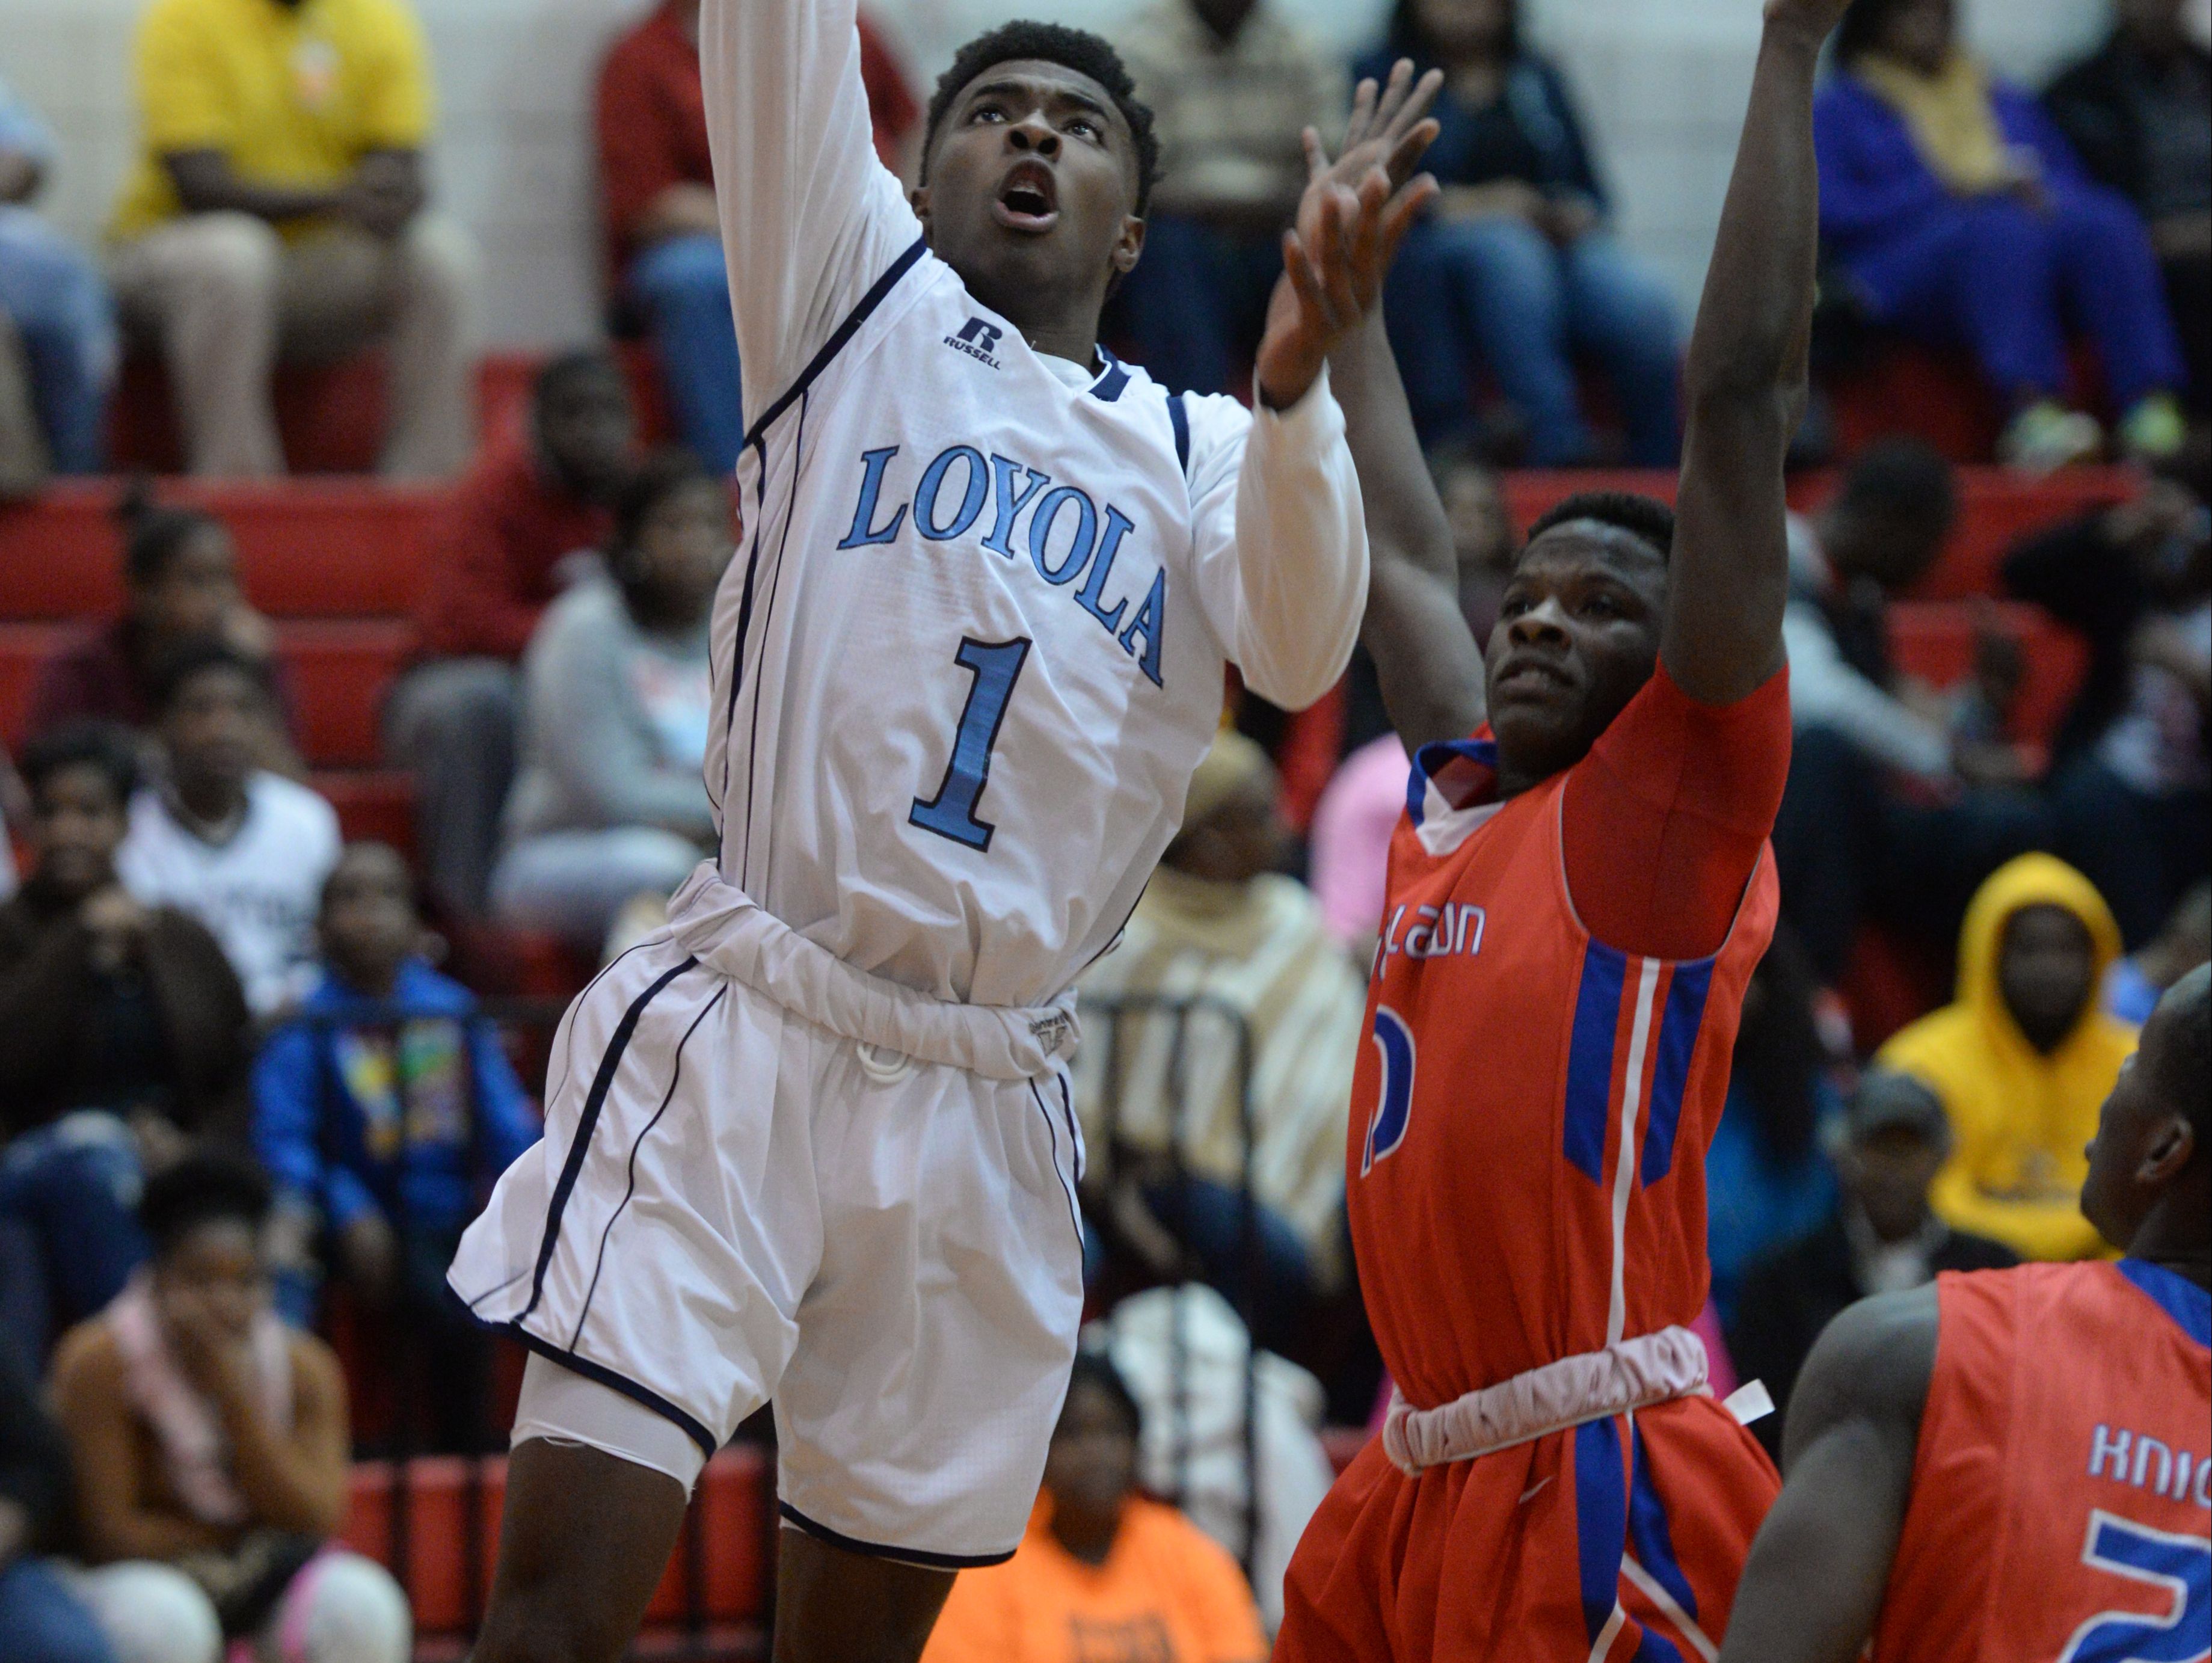 Tony Dorsey of Loyola shoots for two points.